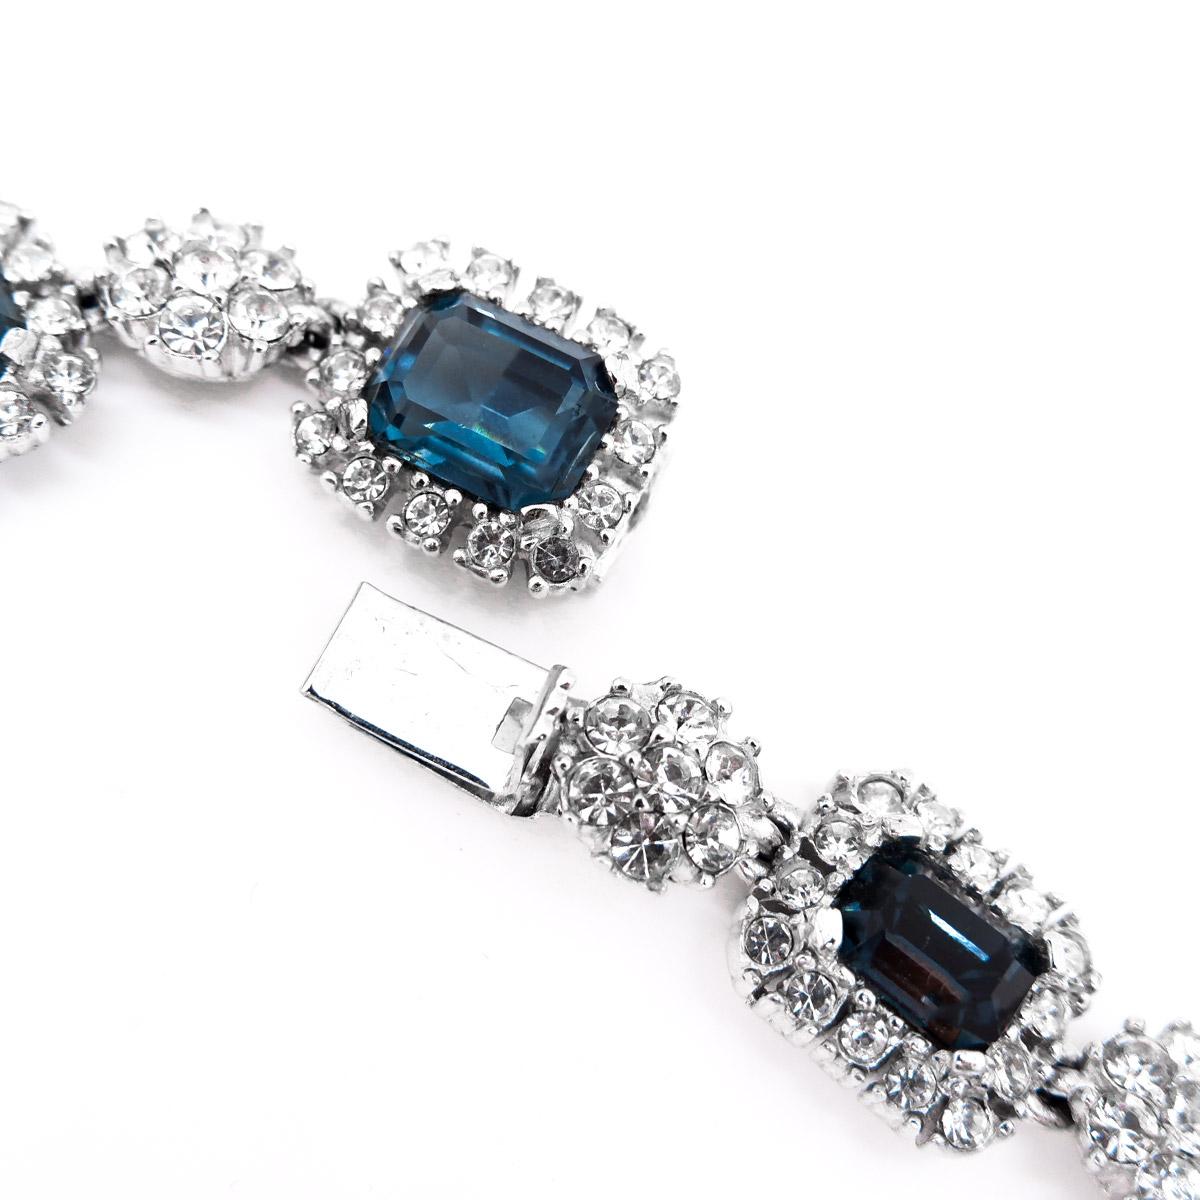 **CINER is a made-to-order house, please allow 10 business days for our artisans to create your jewelry for you** 

A timeless necklace to be adored for generations to come, this rhodium plated heirloom piece has illuminating crystal rhinestone